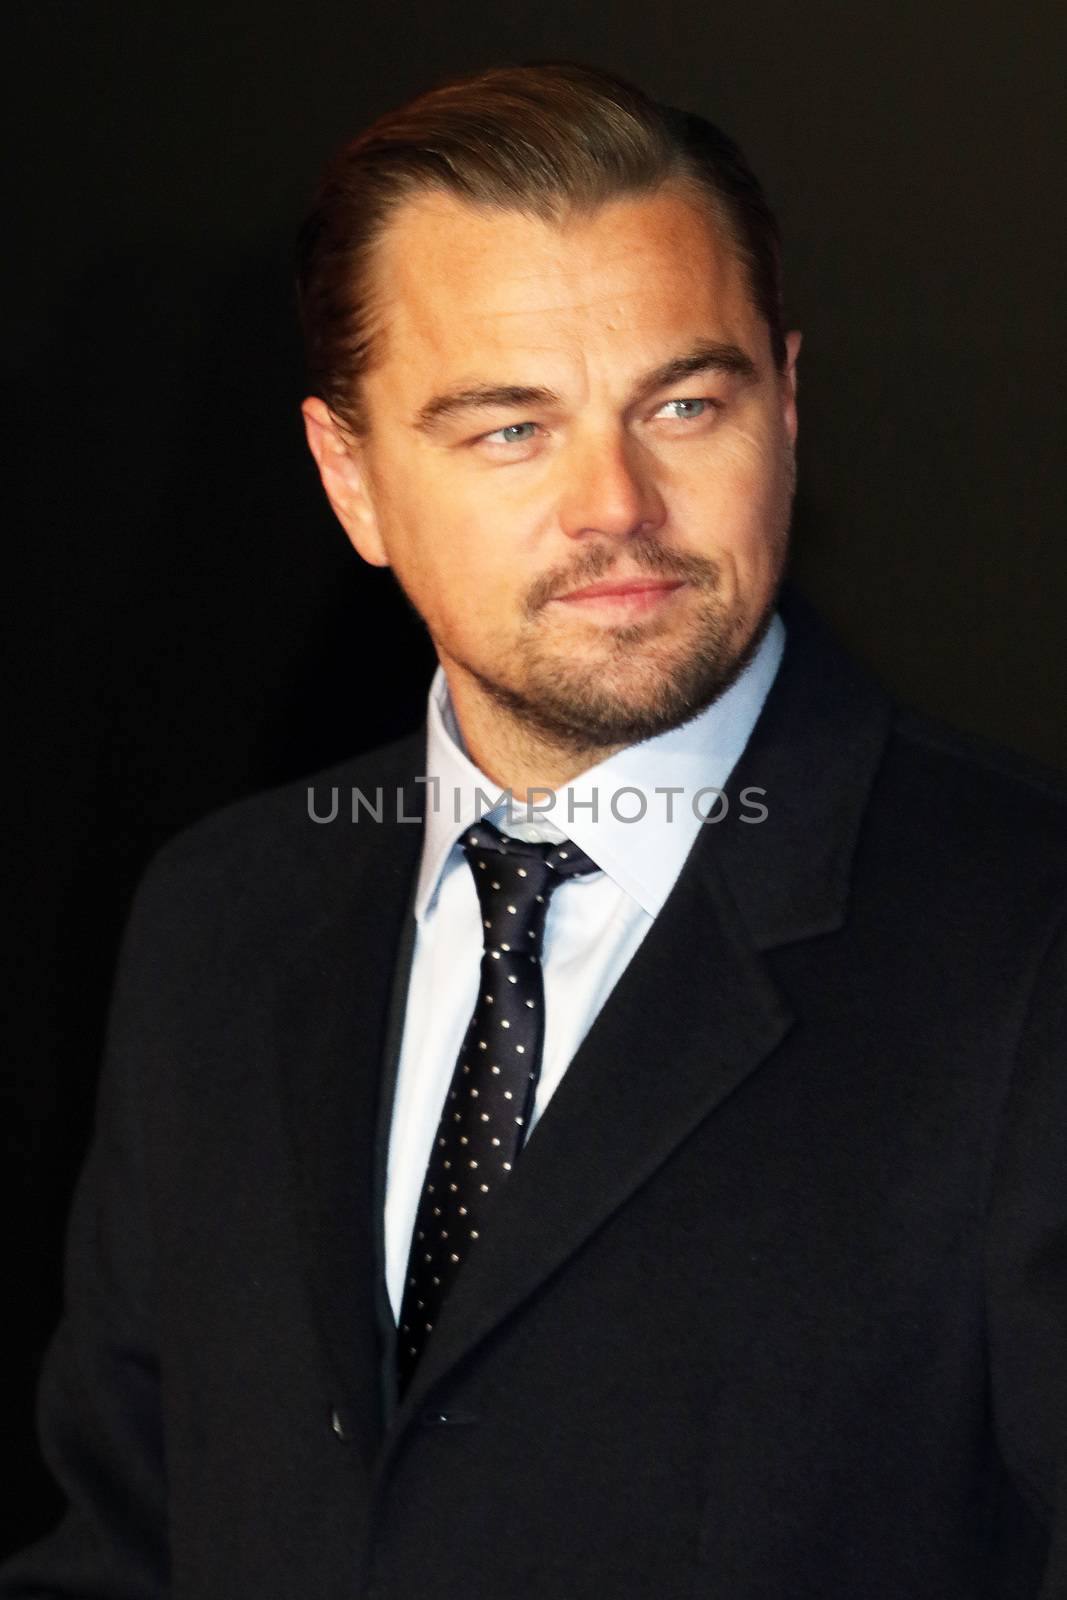 UK, London: Leonardo DiCaprio arrives on the red carpet at Leicester Square in London on January 14, 2016 for the UK premiere of the Revenant, Alejandro Gonzalez Inarritu's Oscar-nominated film starring DiCaprio.